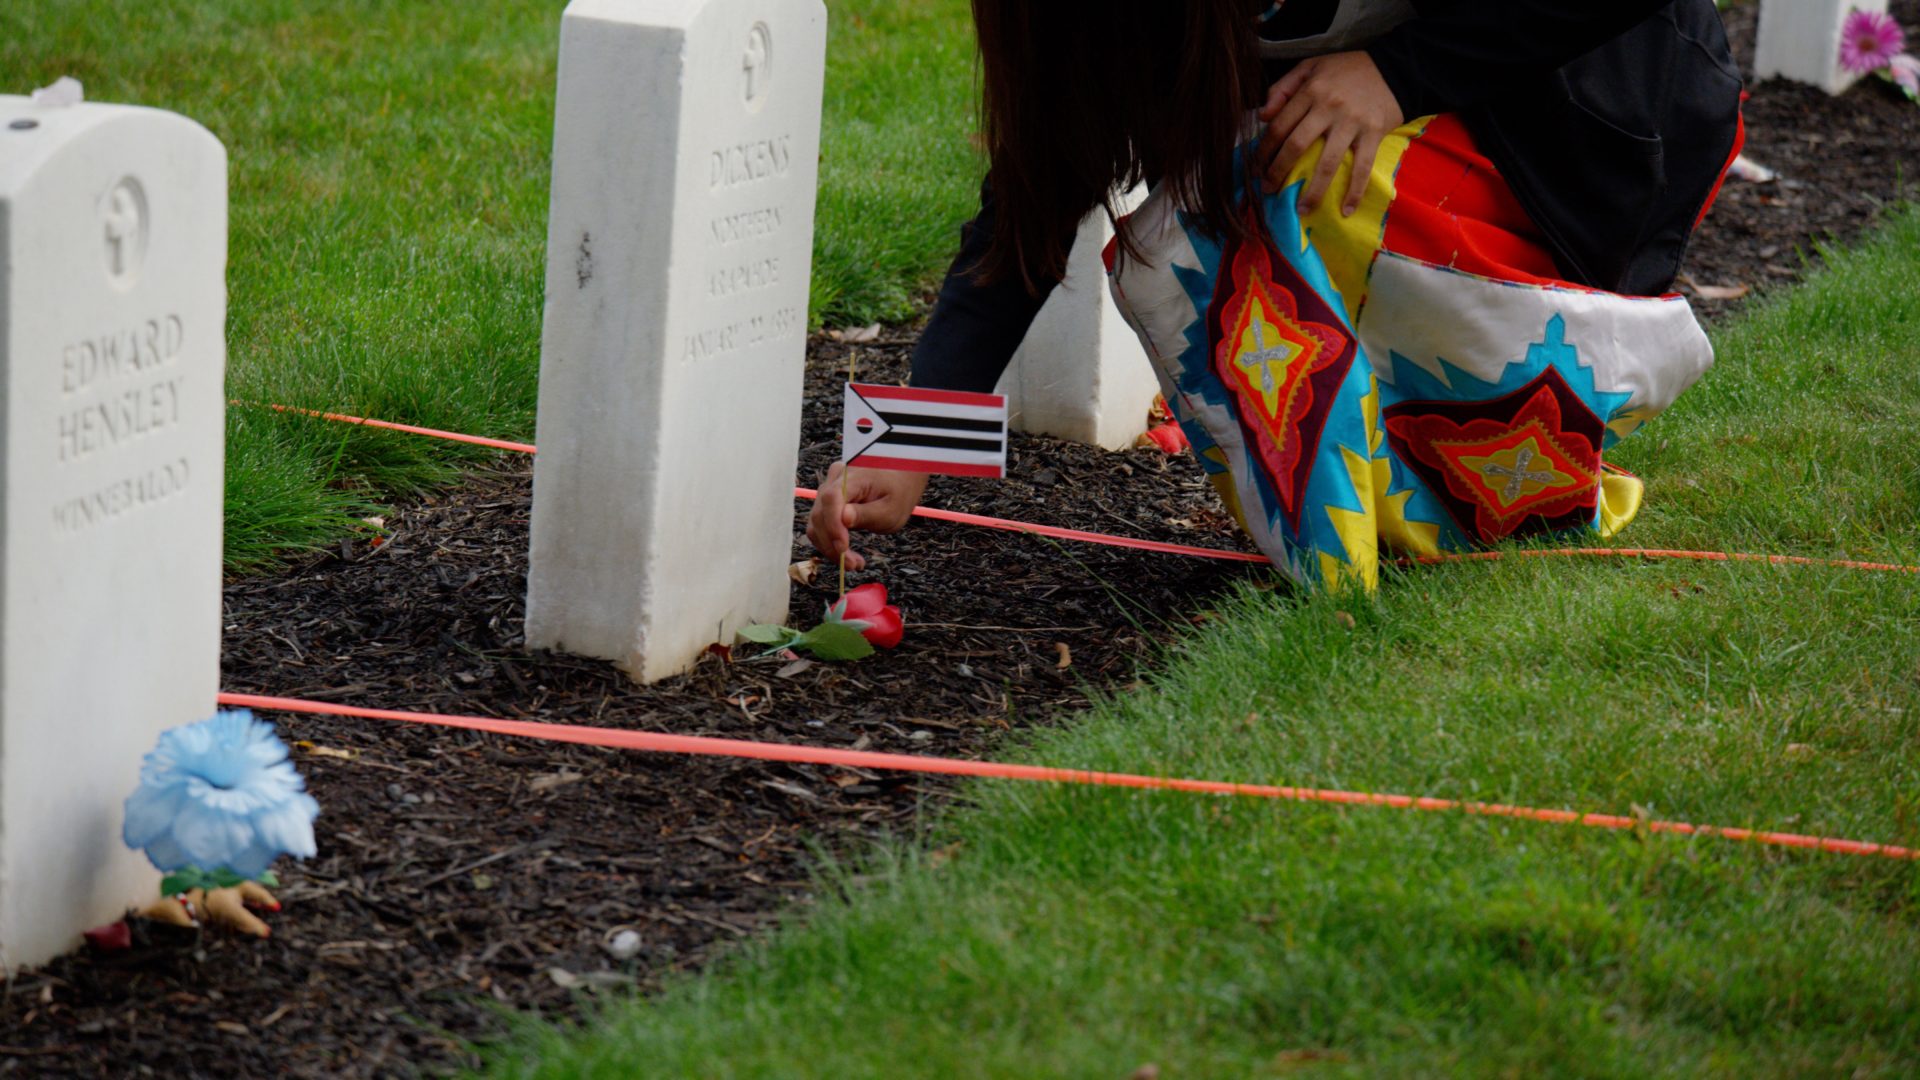 Loveeda White places an Arapaho flag at the base of Little Chief/Dickens Nor's headstone in the Carlisle Indian Cemetery, Carlisle PA, 2017